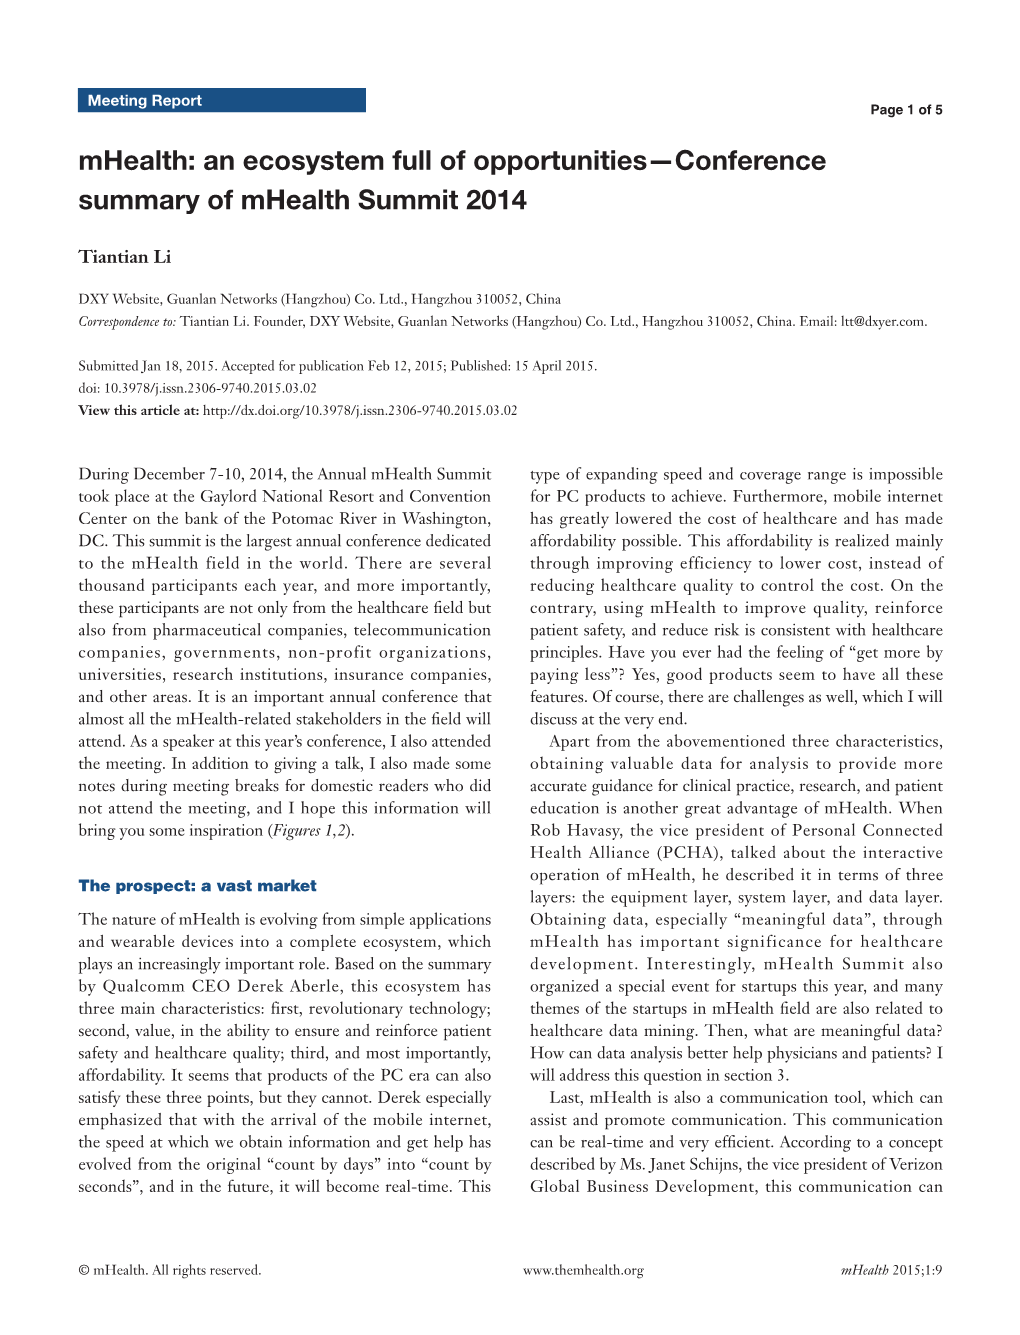 An Ecosystem Full of Opportunities—Conference Summary of Mhealth Summit 2014